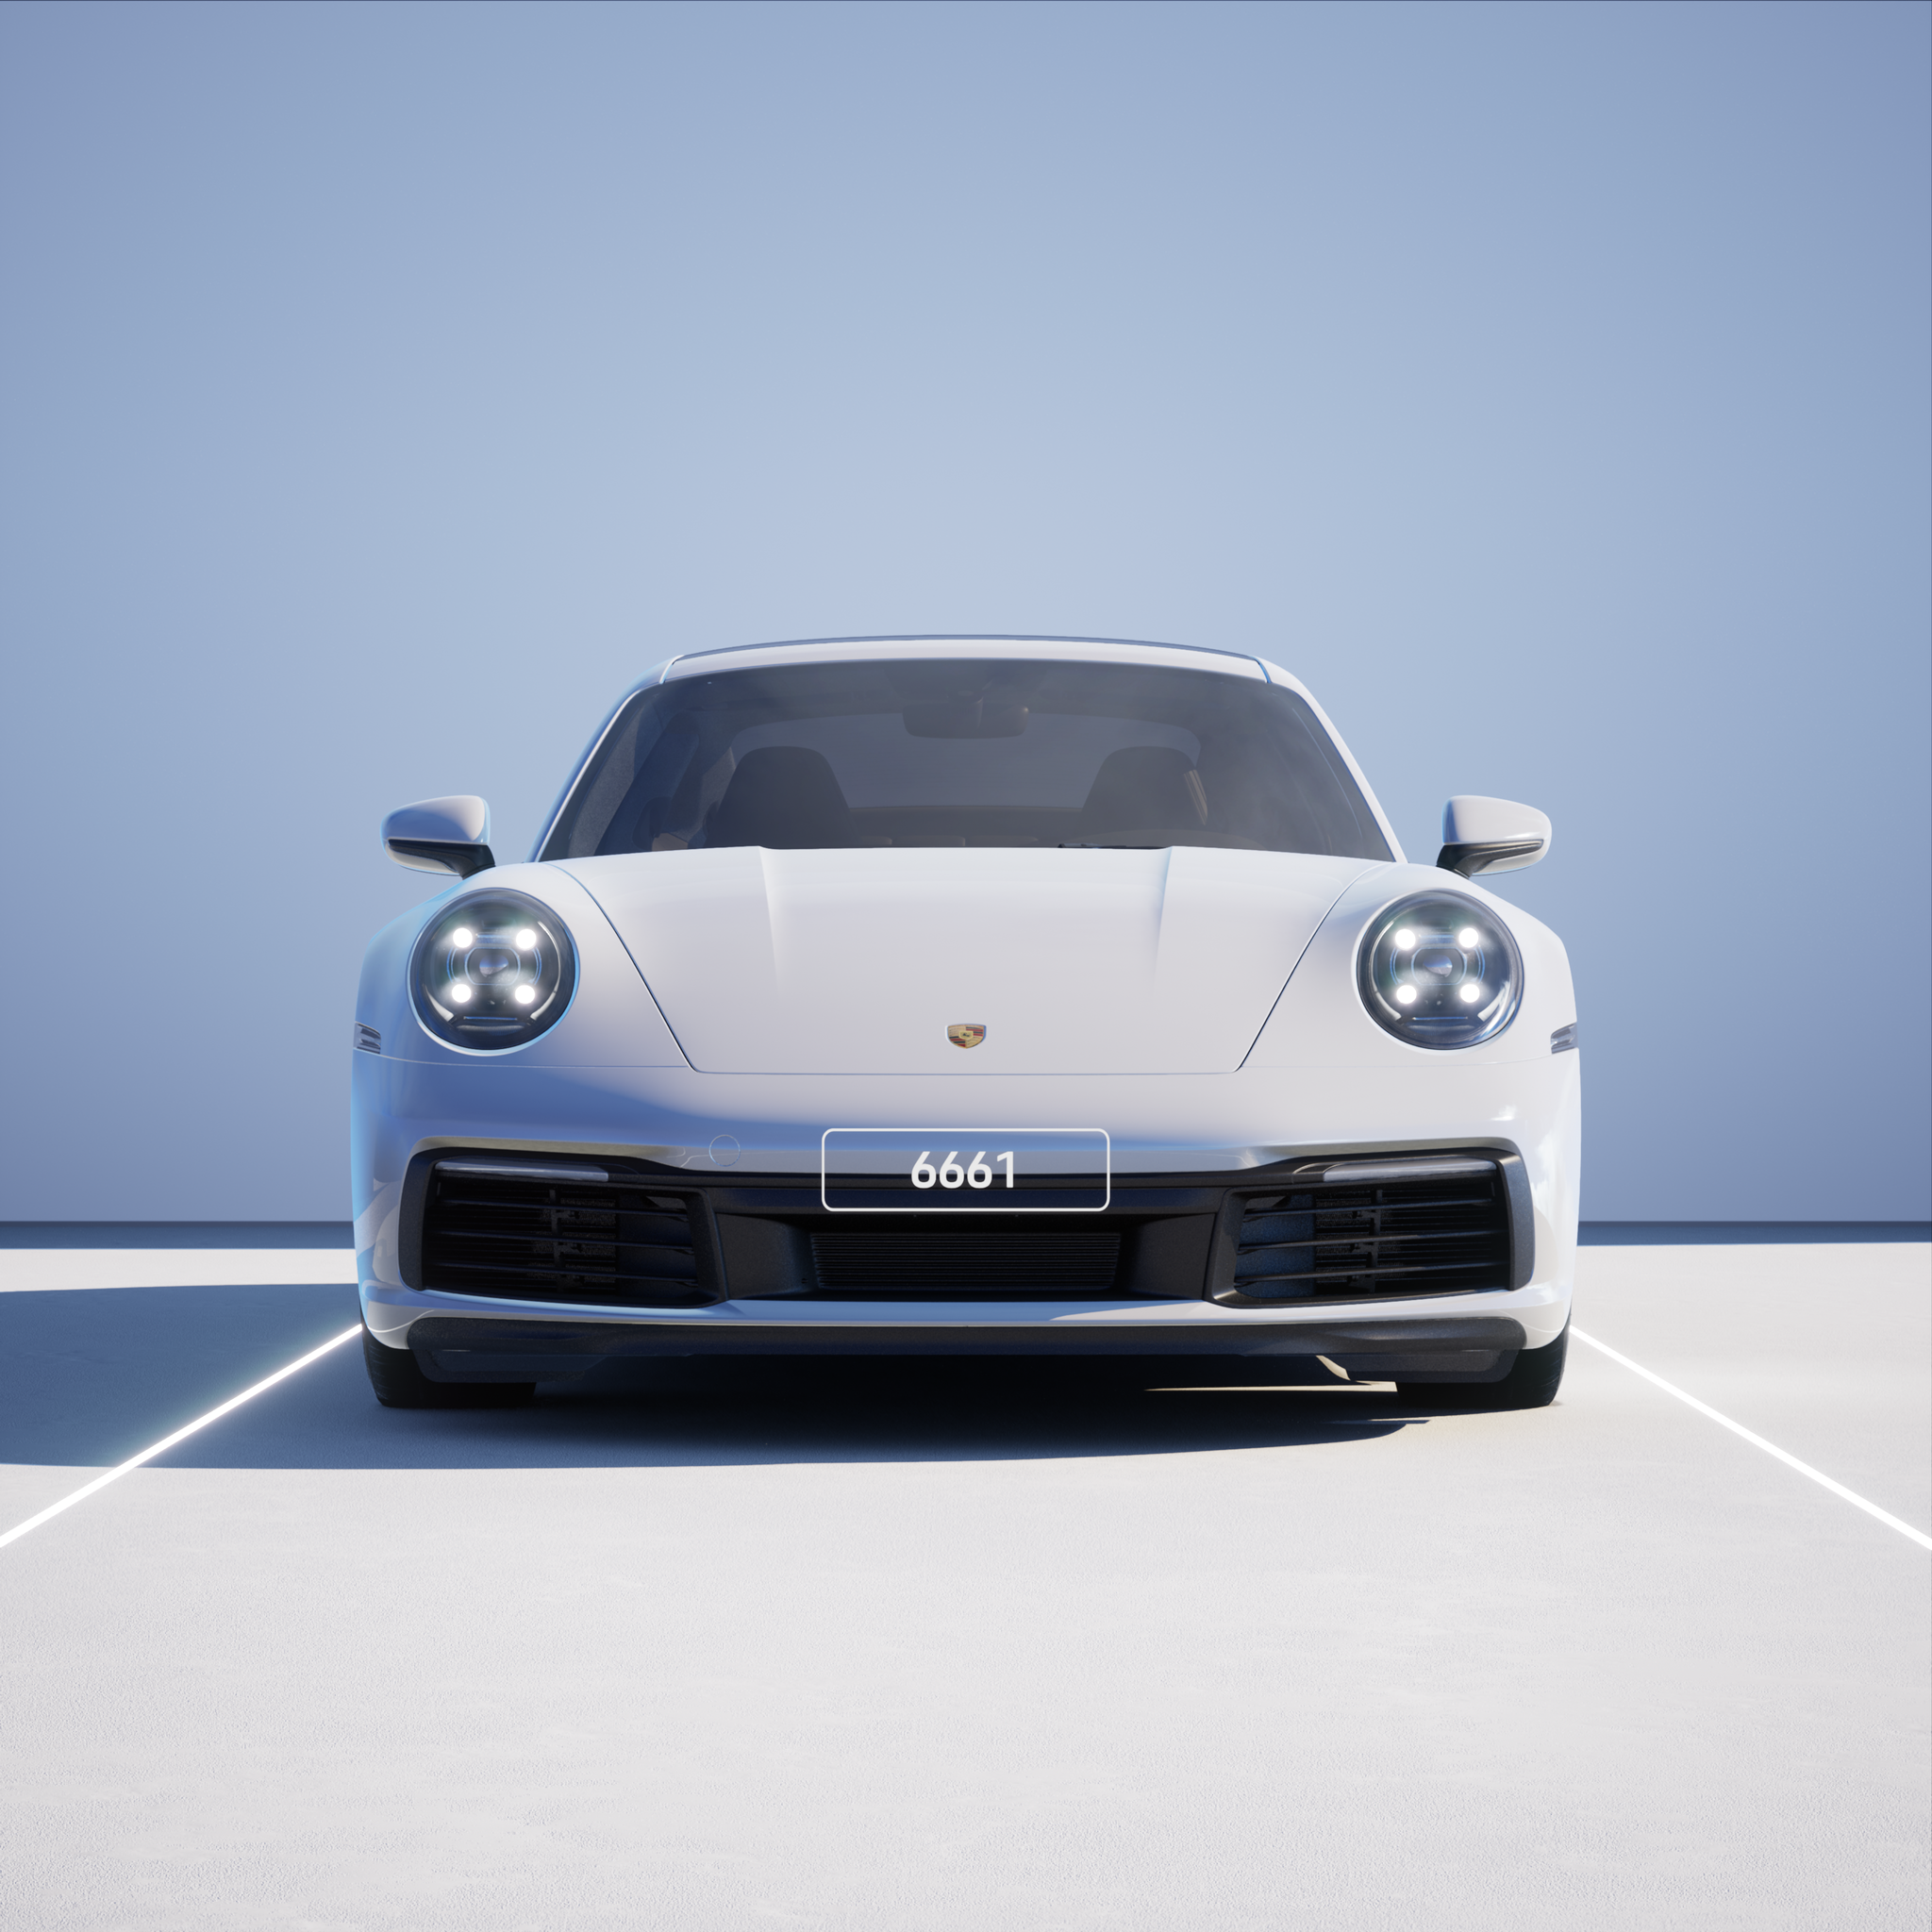 The PORSCHΞ 911 6661 image in phase